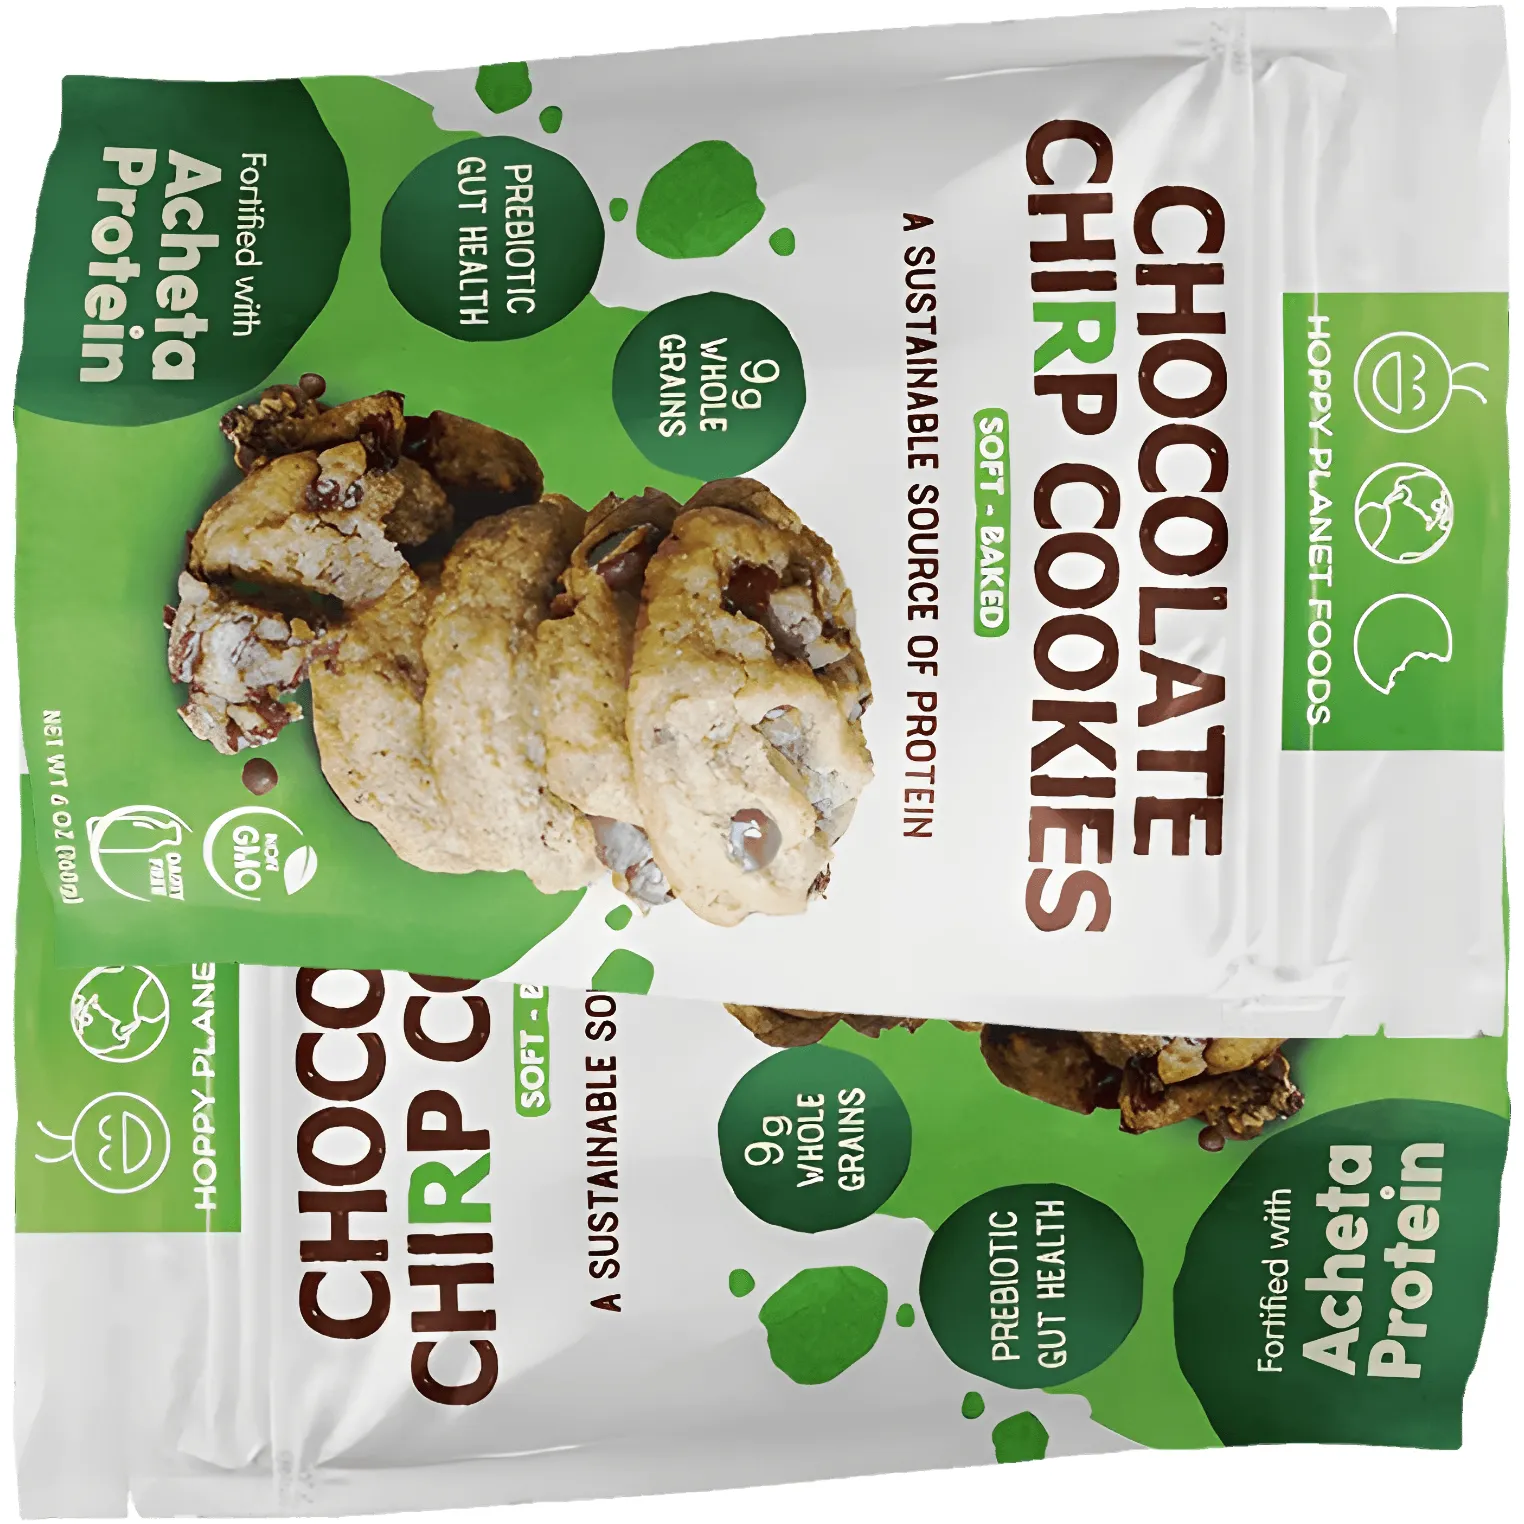 Free Hoppy Planet Foods Cookie & Muffin Bites